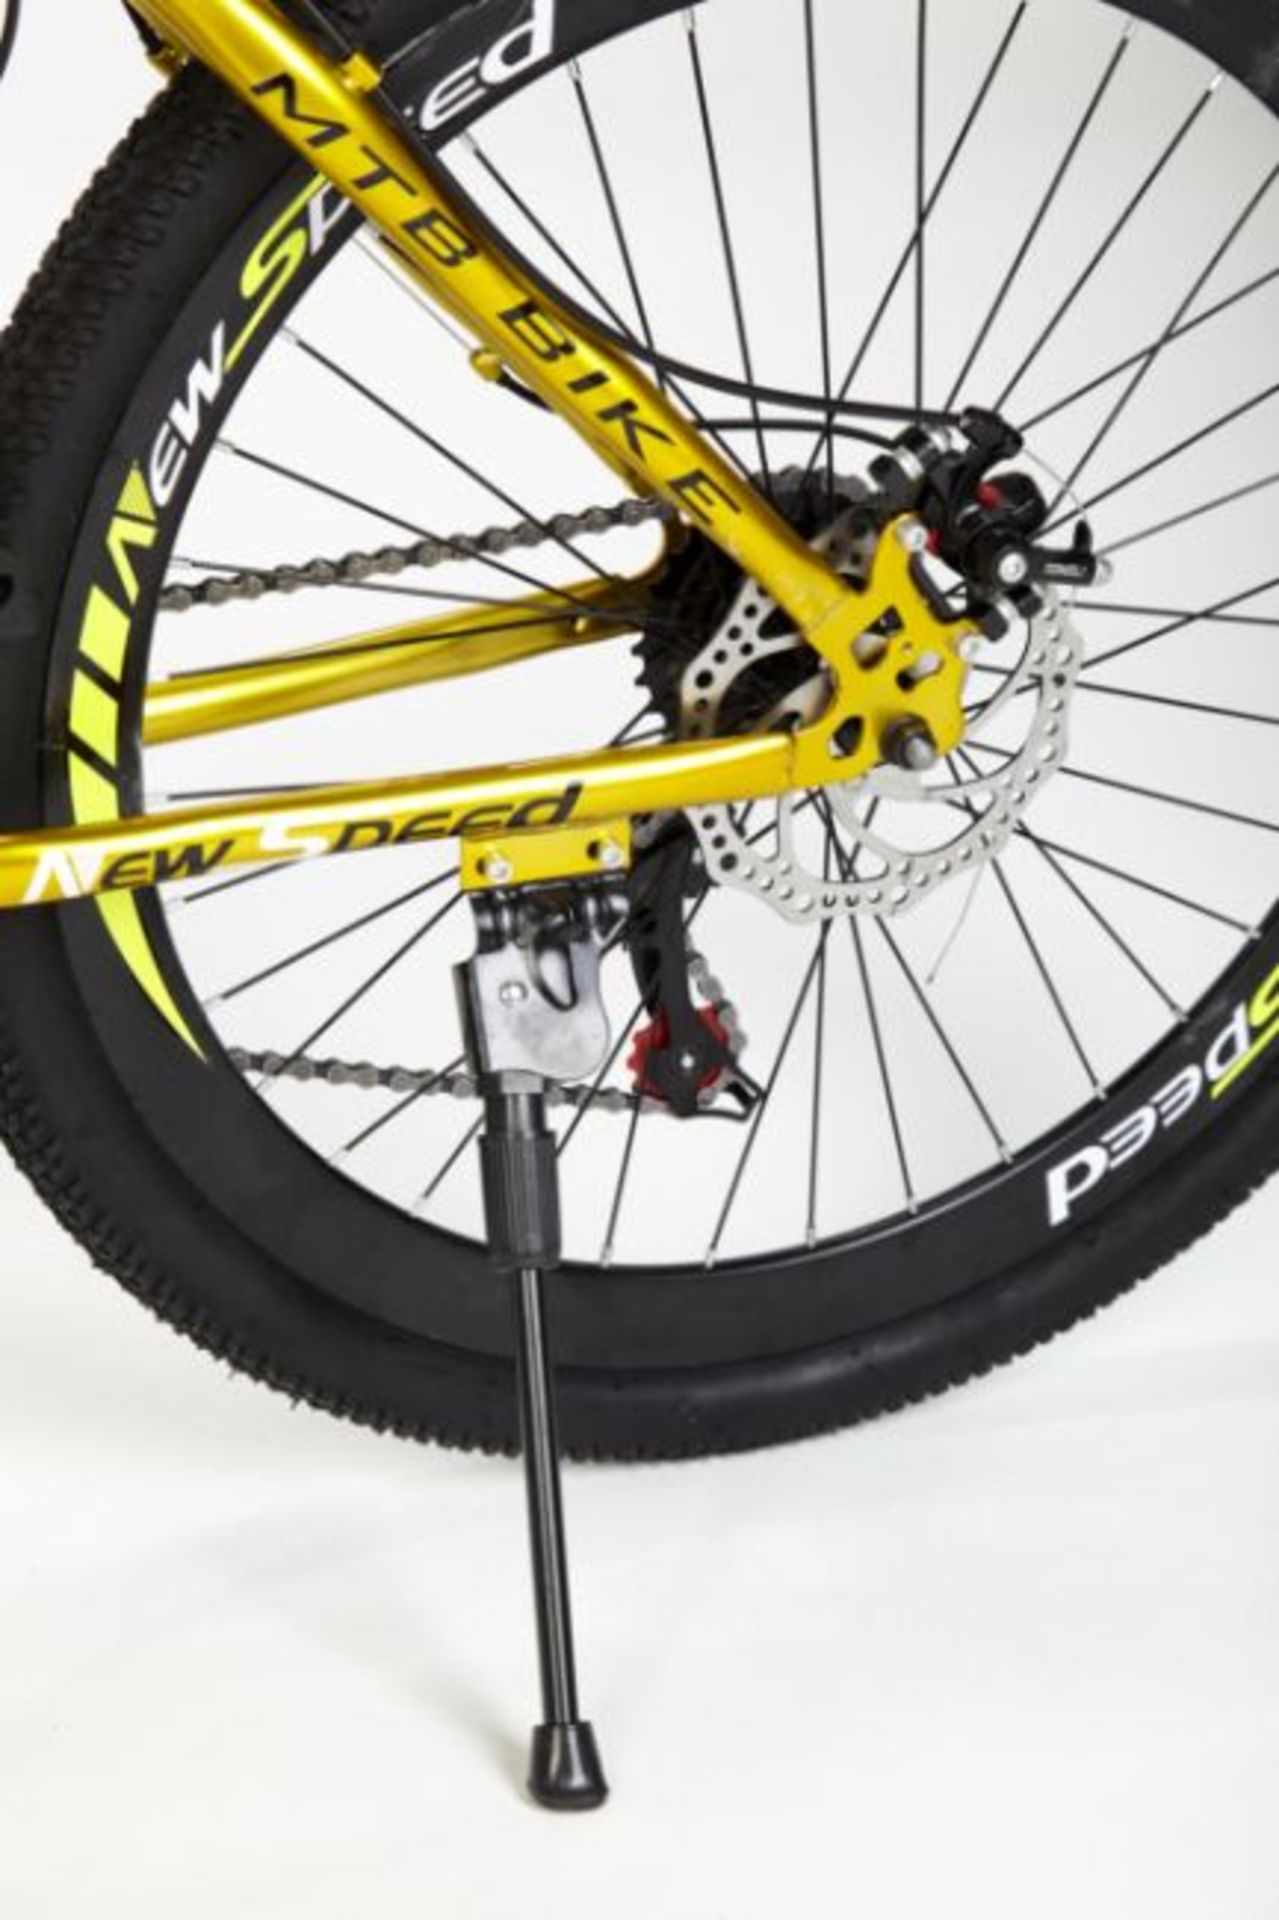 BRAND NEW NEW SPEED 21 GEARS STUNNING SUSPENSION GOLD COLOURED MOUNTAIN BIKE - Image 3 of 11